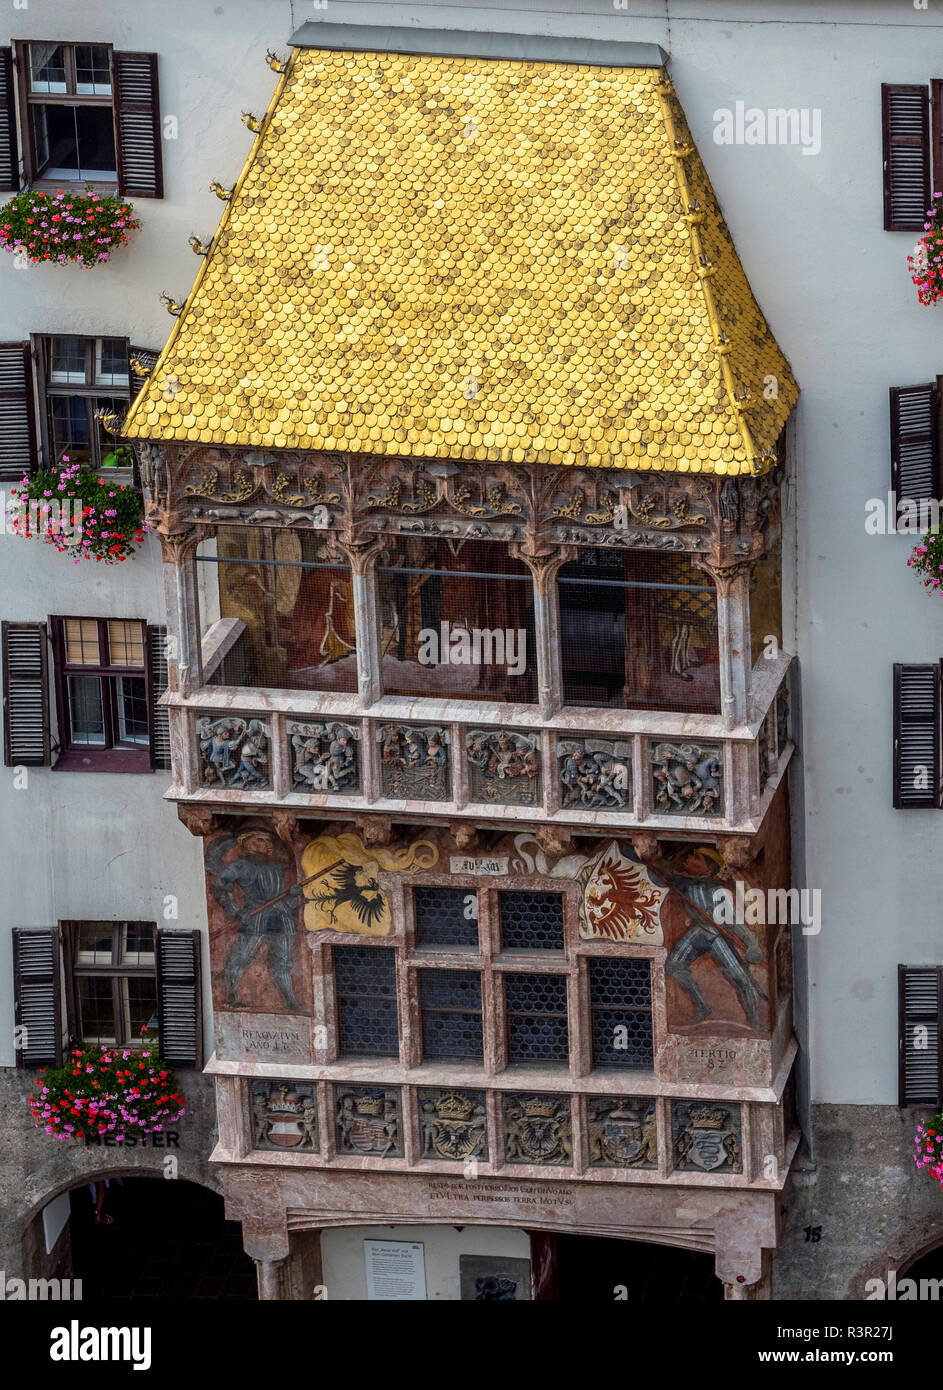 Goldenes Dachl or Golden Roof, late gothic alcove balcony, Innsbruck, Tyrol, Austria, Europe Stock Photo